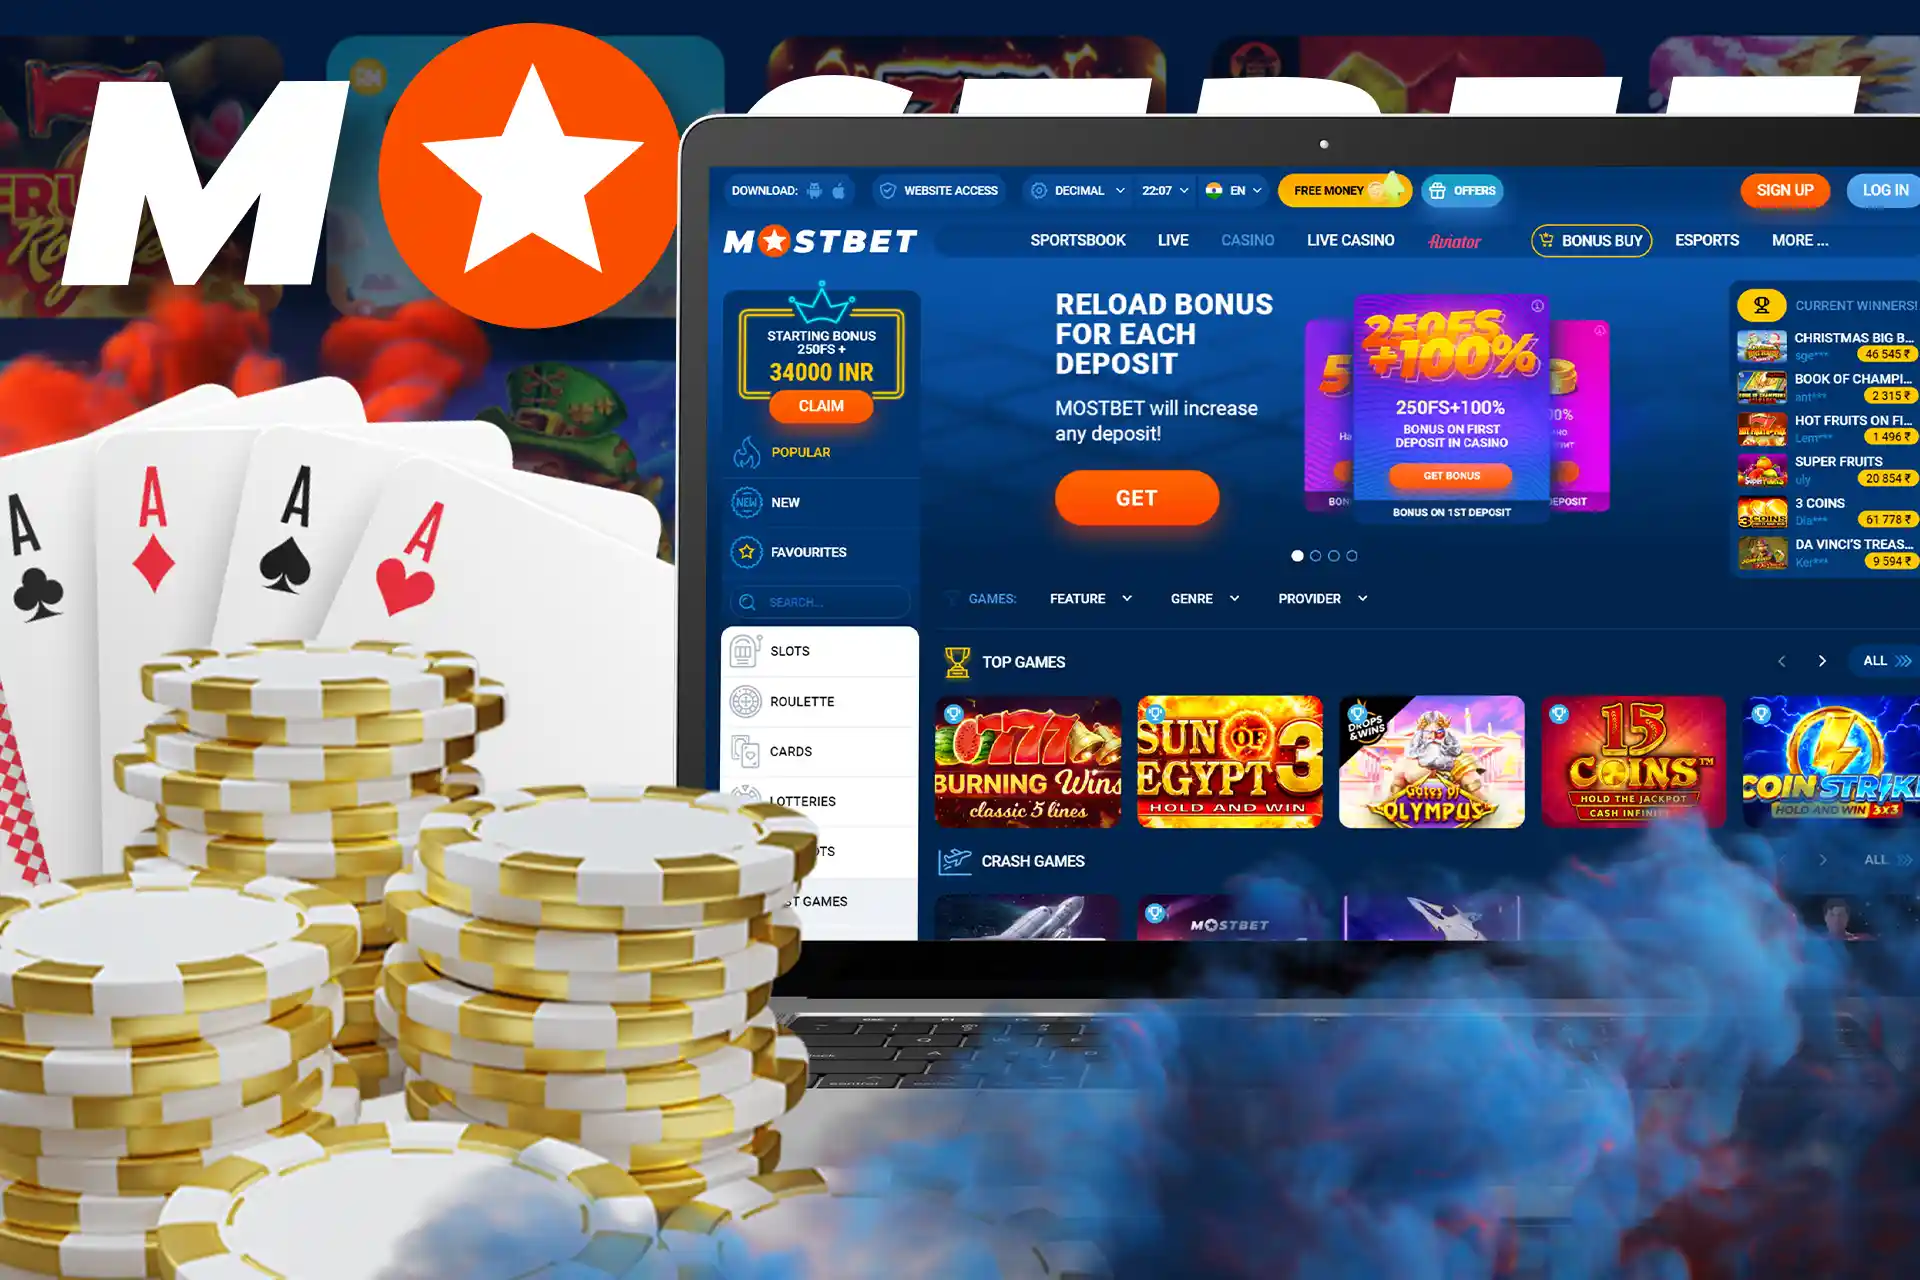 Besides slots, casino fans can play live games with real dealers.